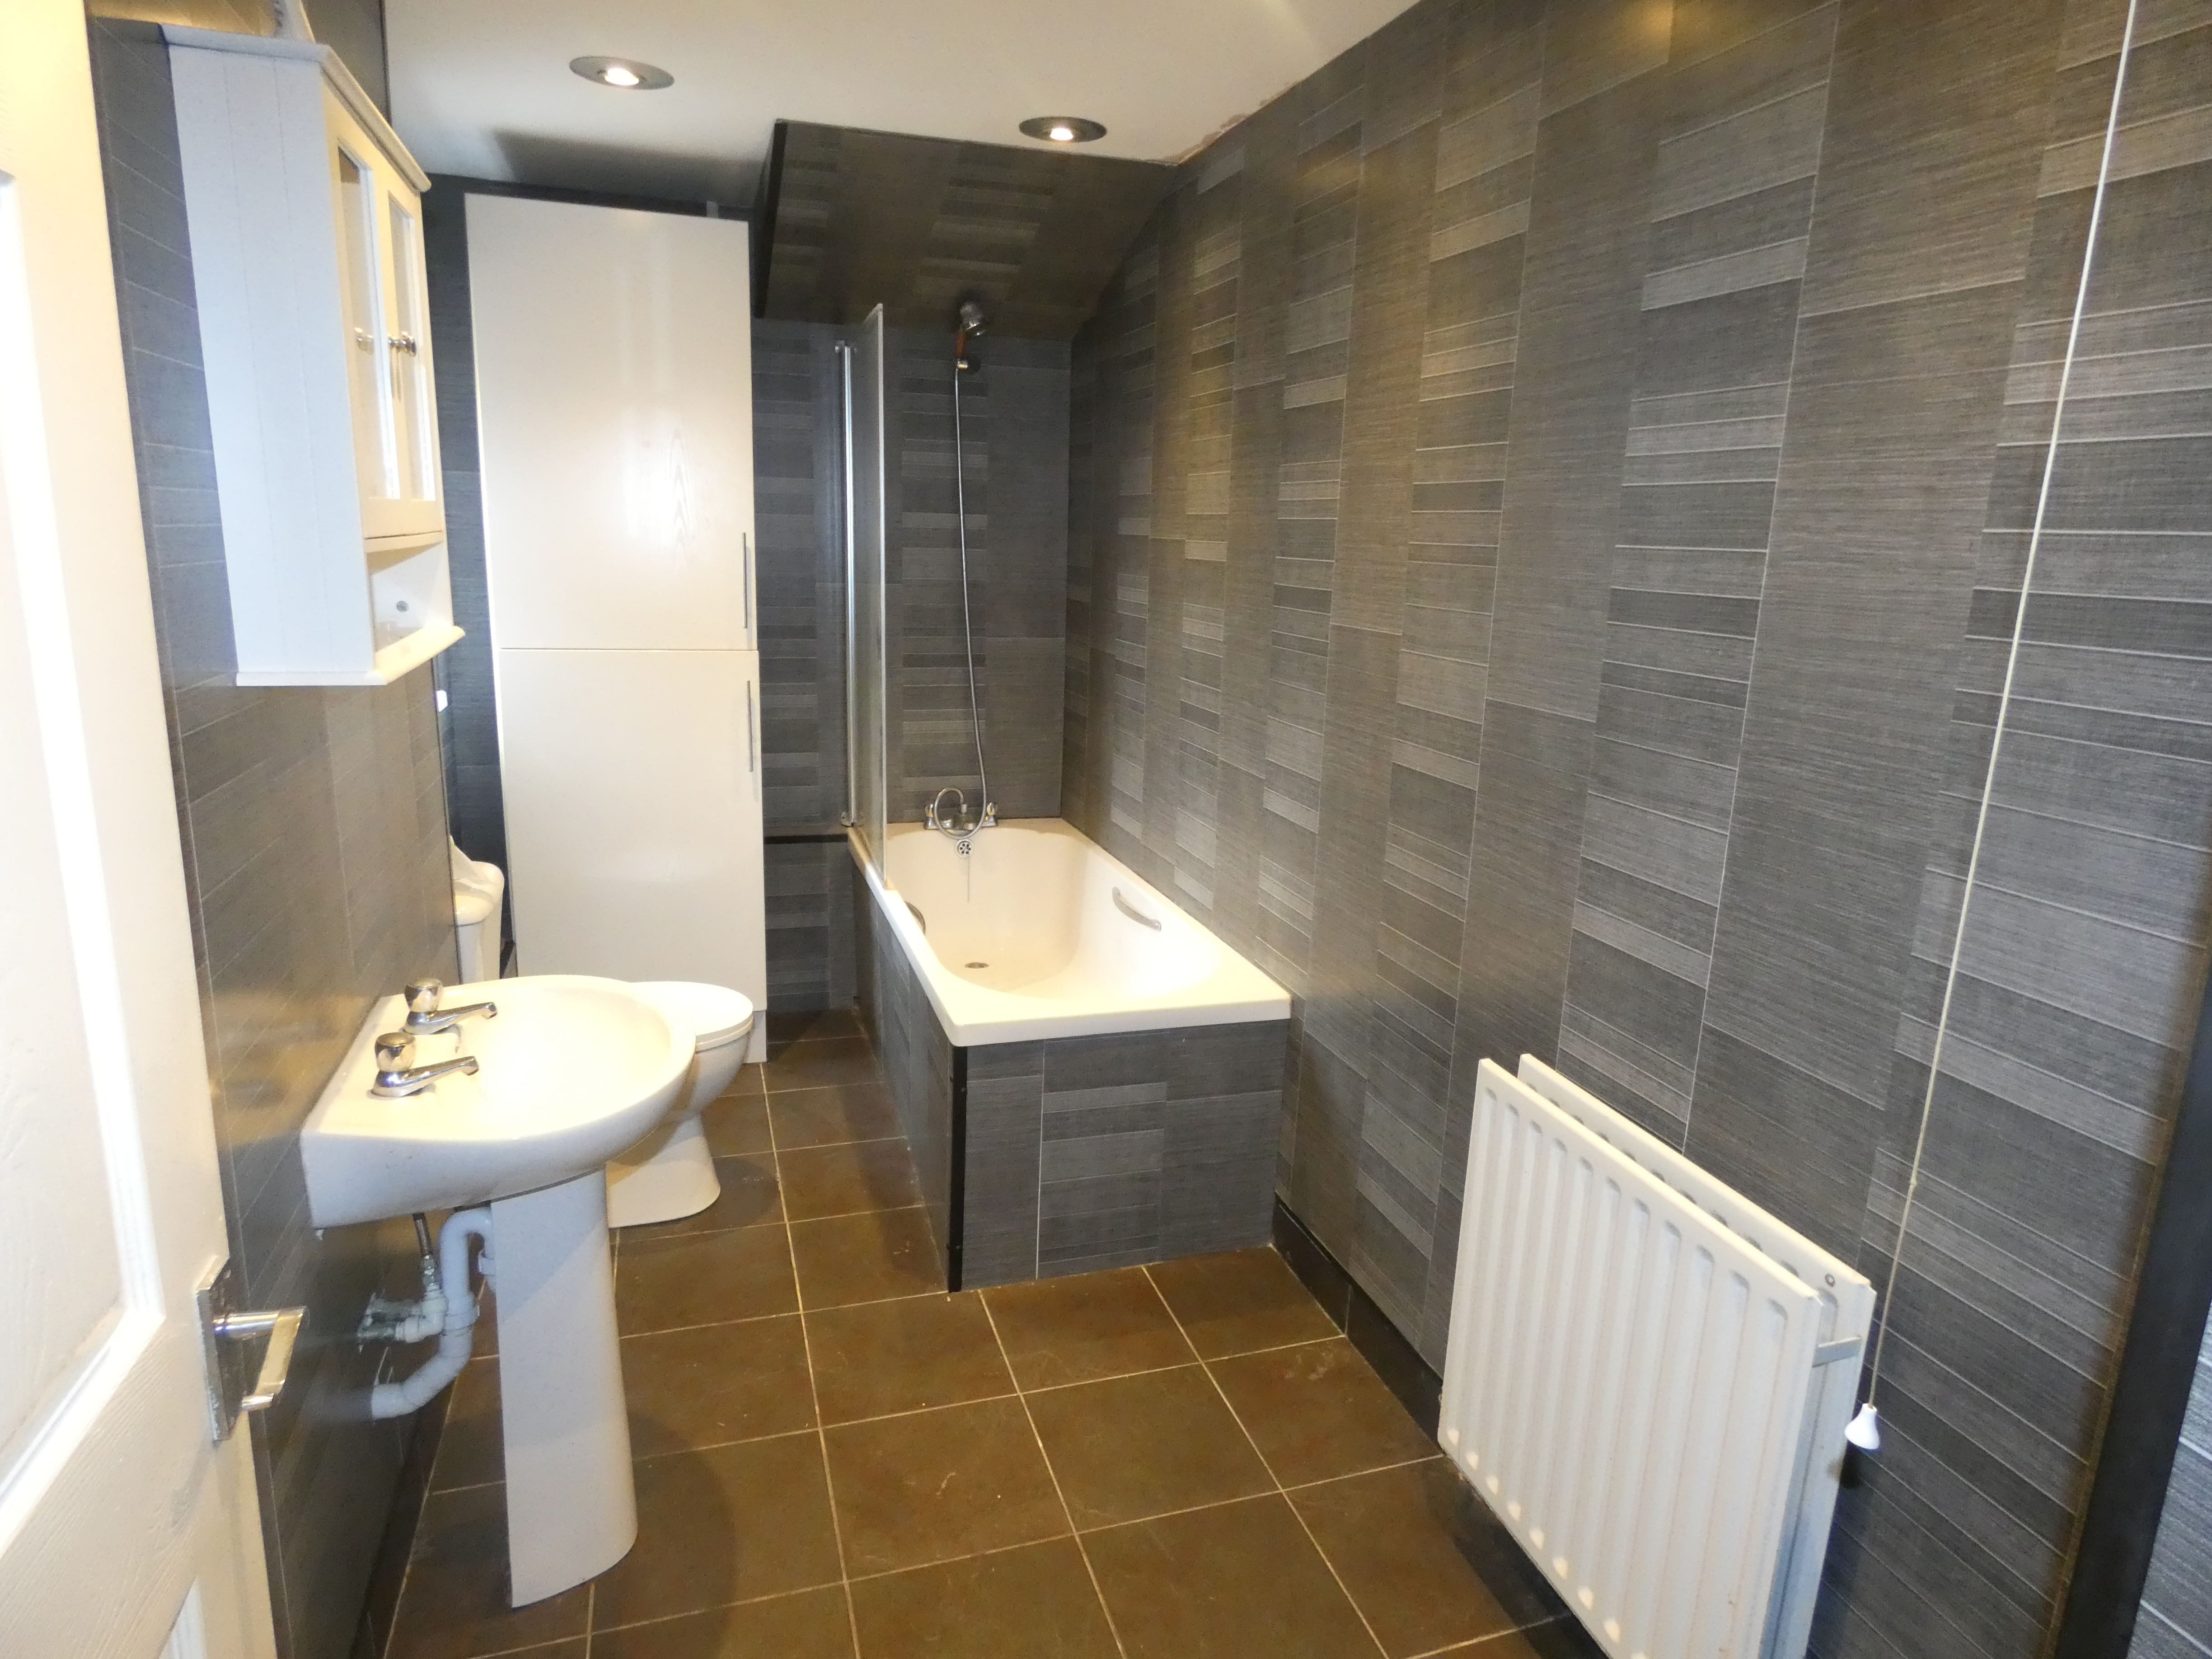 2 bed flat to rent in Hazlerigg, Newcastle upon tyne  - Property Image 1